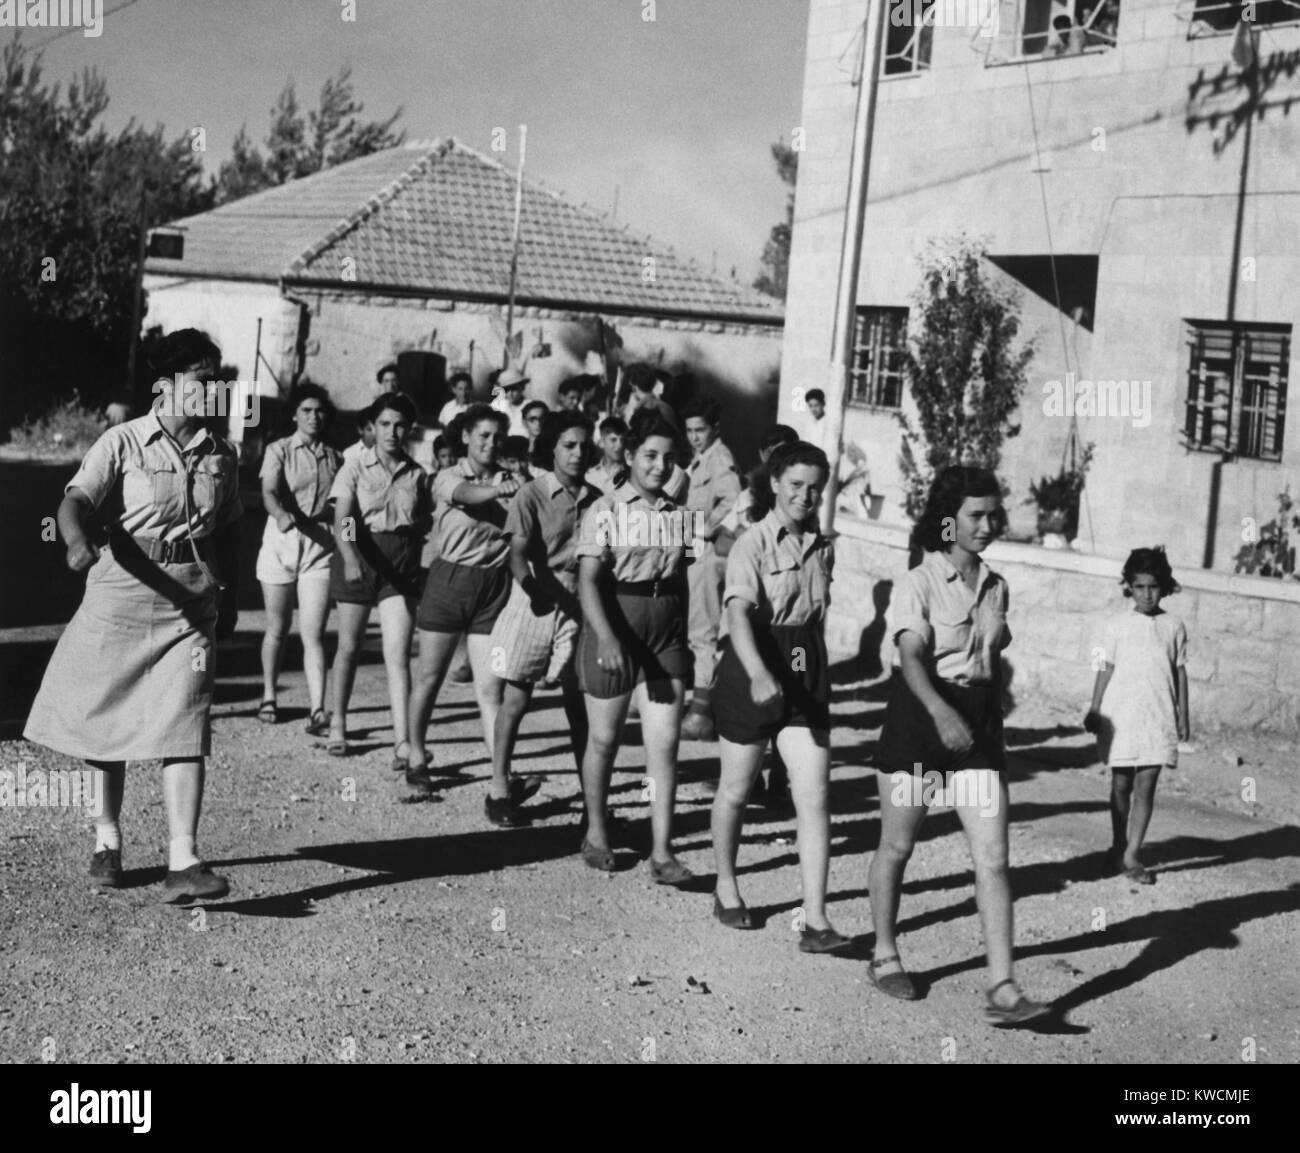 Jewish girls receive military training from the militant Jewish group, Irgun, June 27, 1948. Irgun, was a Zionist paramilitary group that operated in Palestine between 1931 and 1948. - (BSLOC 2014 15 204) Stock Photo